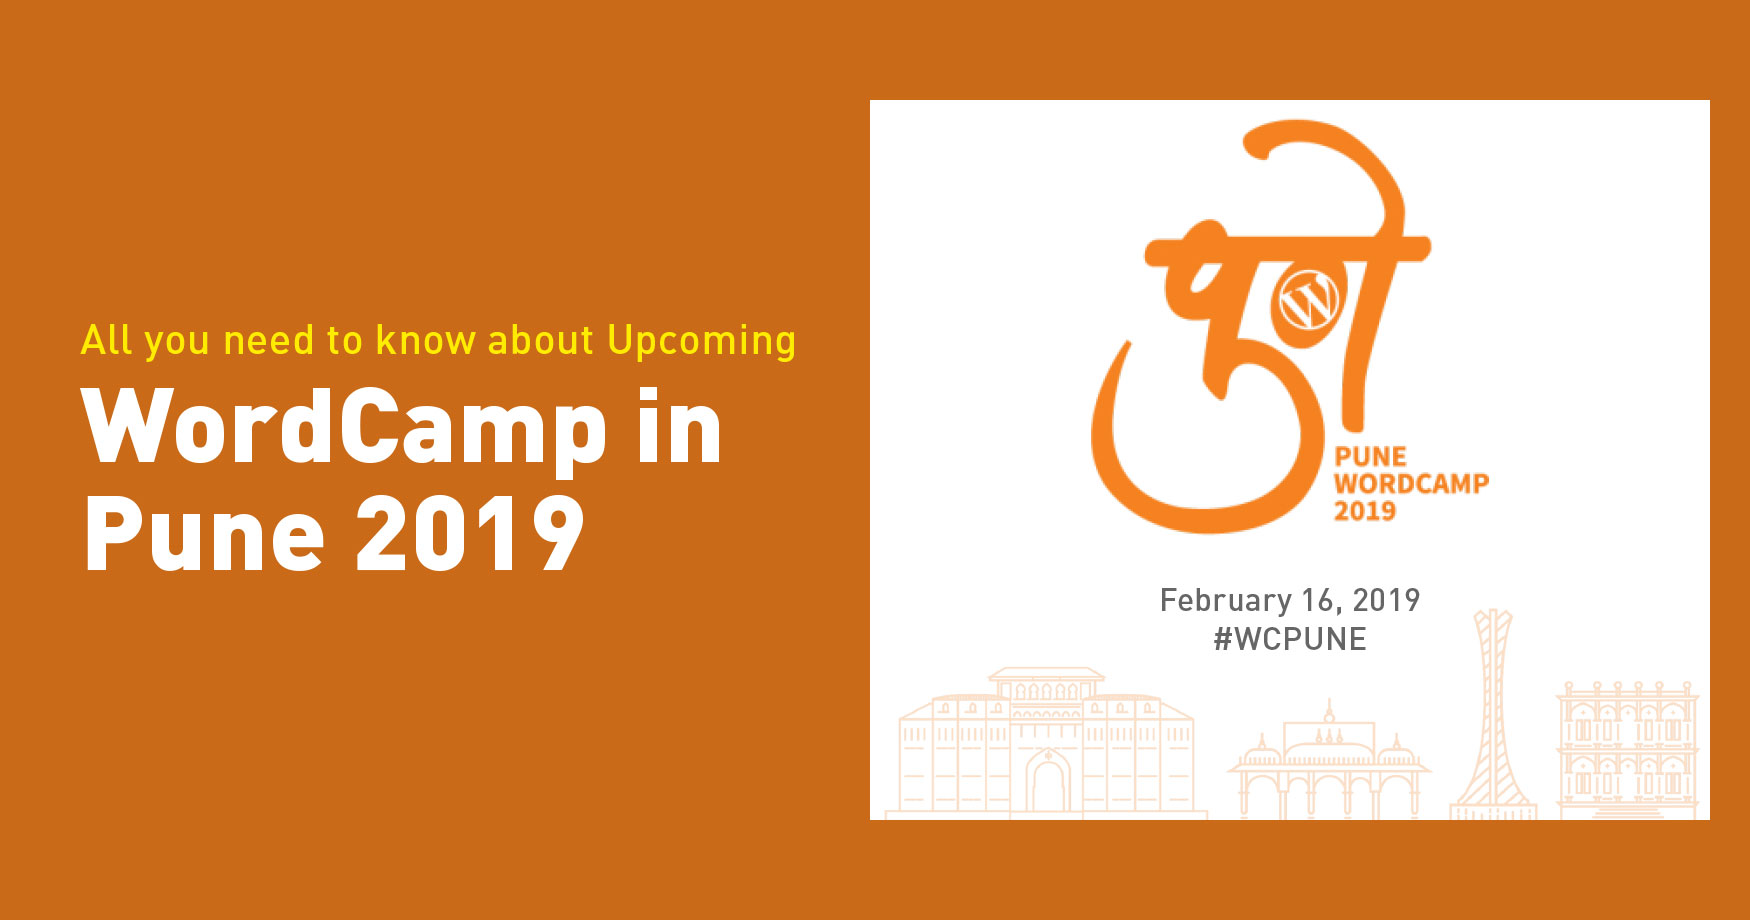 All you need to know about Upcoming WordCamp in Pune 2019